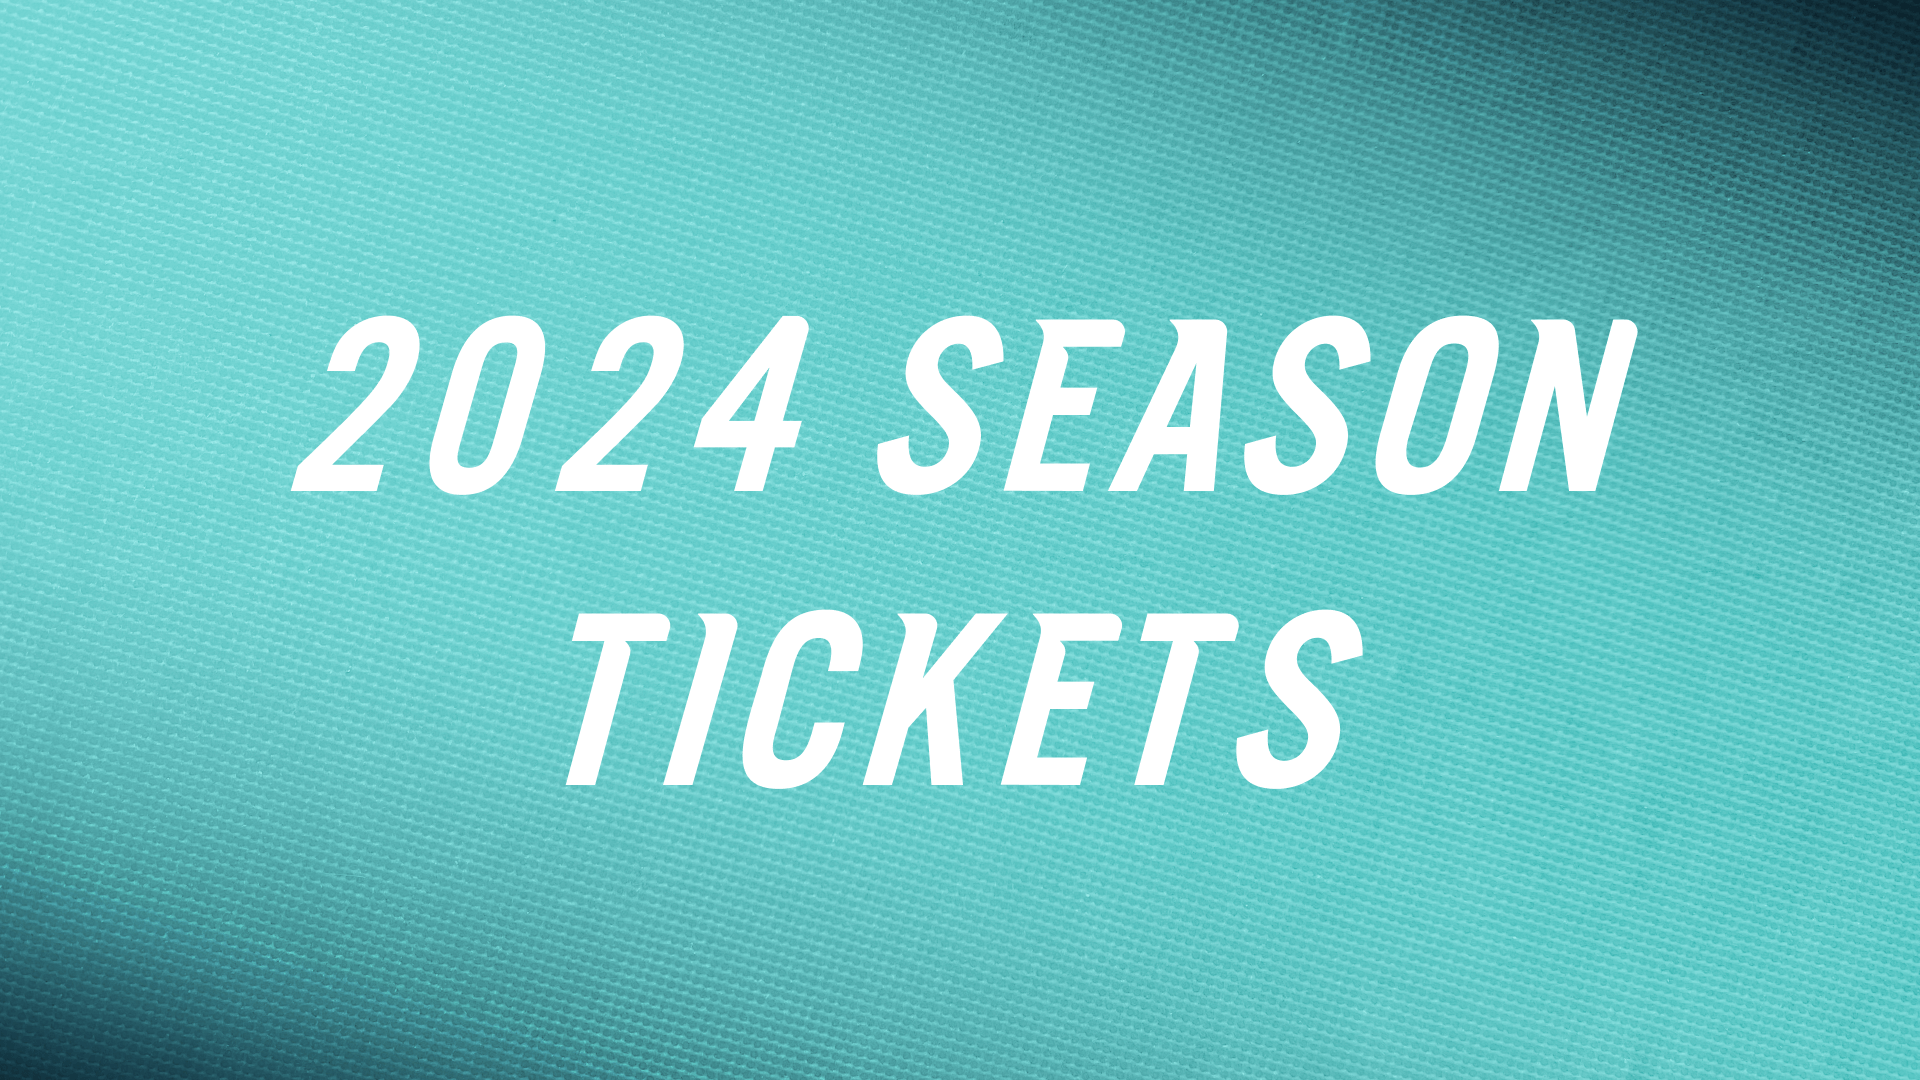 A graphic that says "2024 Season Tickets"  and links to a page to purchase them.